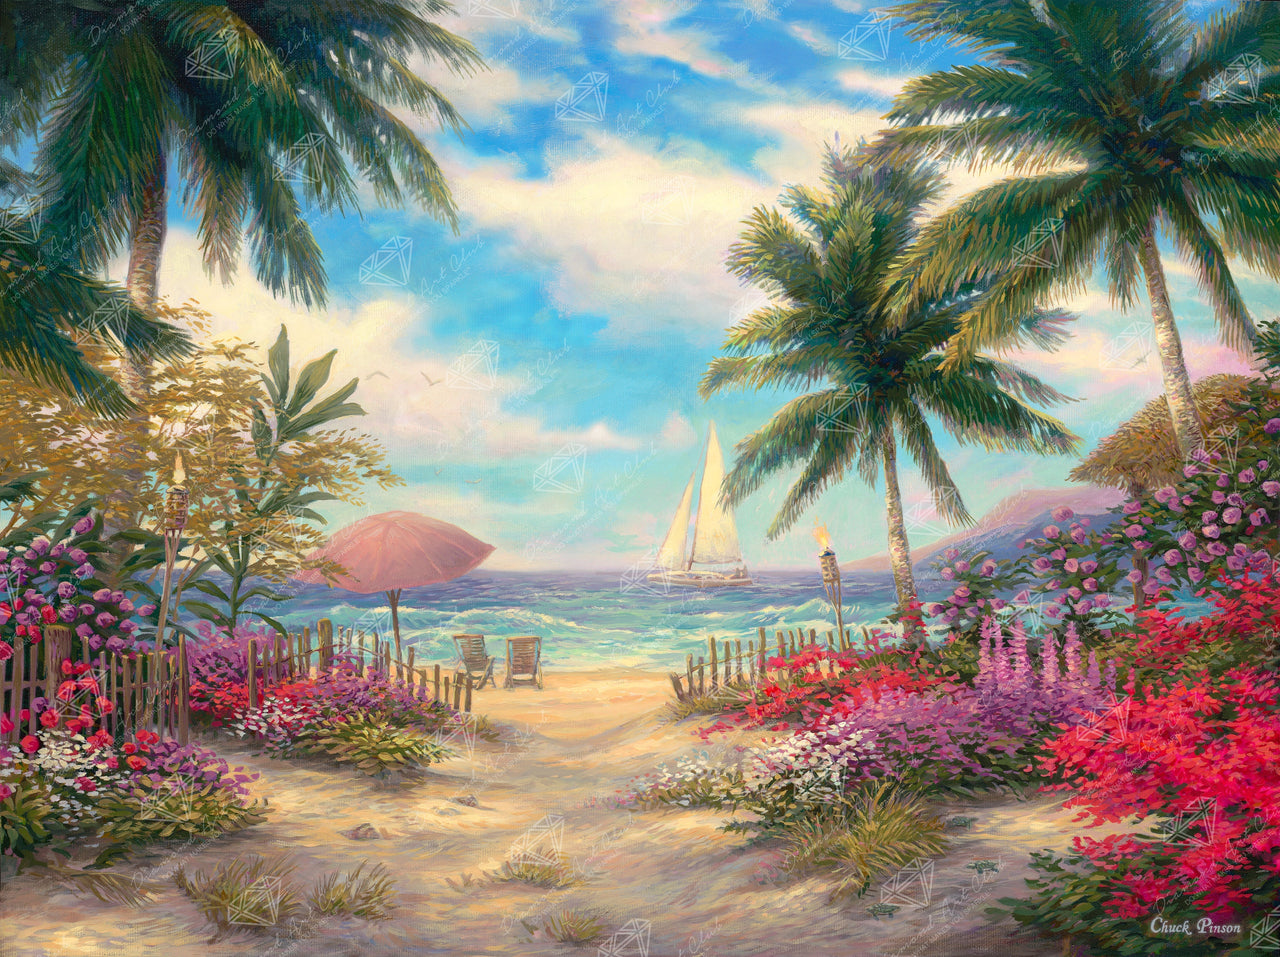 Diamond Painting Sea Breeze Path 34.3" x 25.6" (87cm x 65cm) / Square With 52 Colors Including 3 ABs and 2 Fairy Dust Diamonds / 91,089